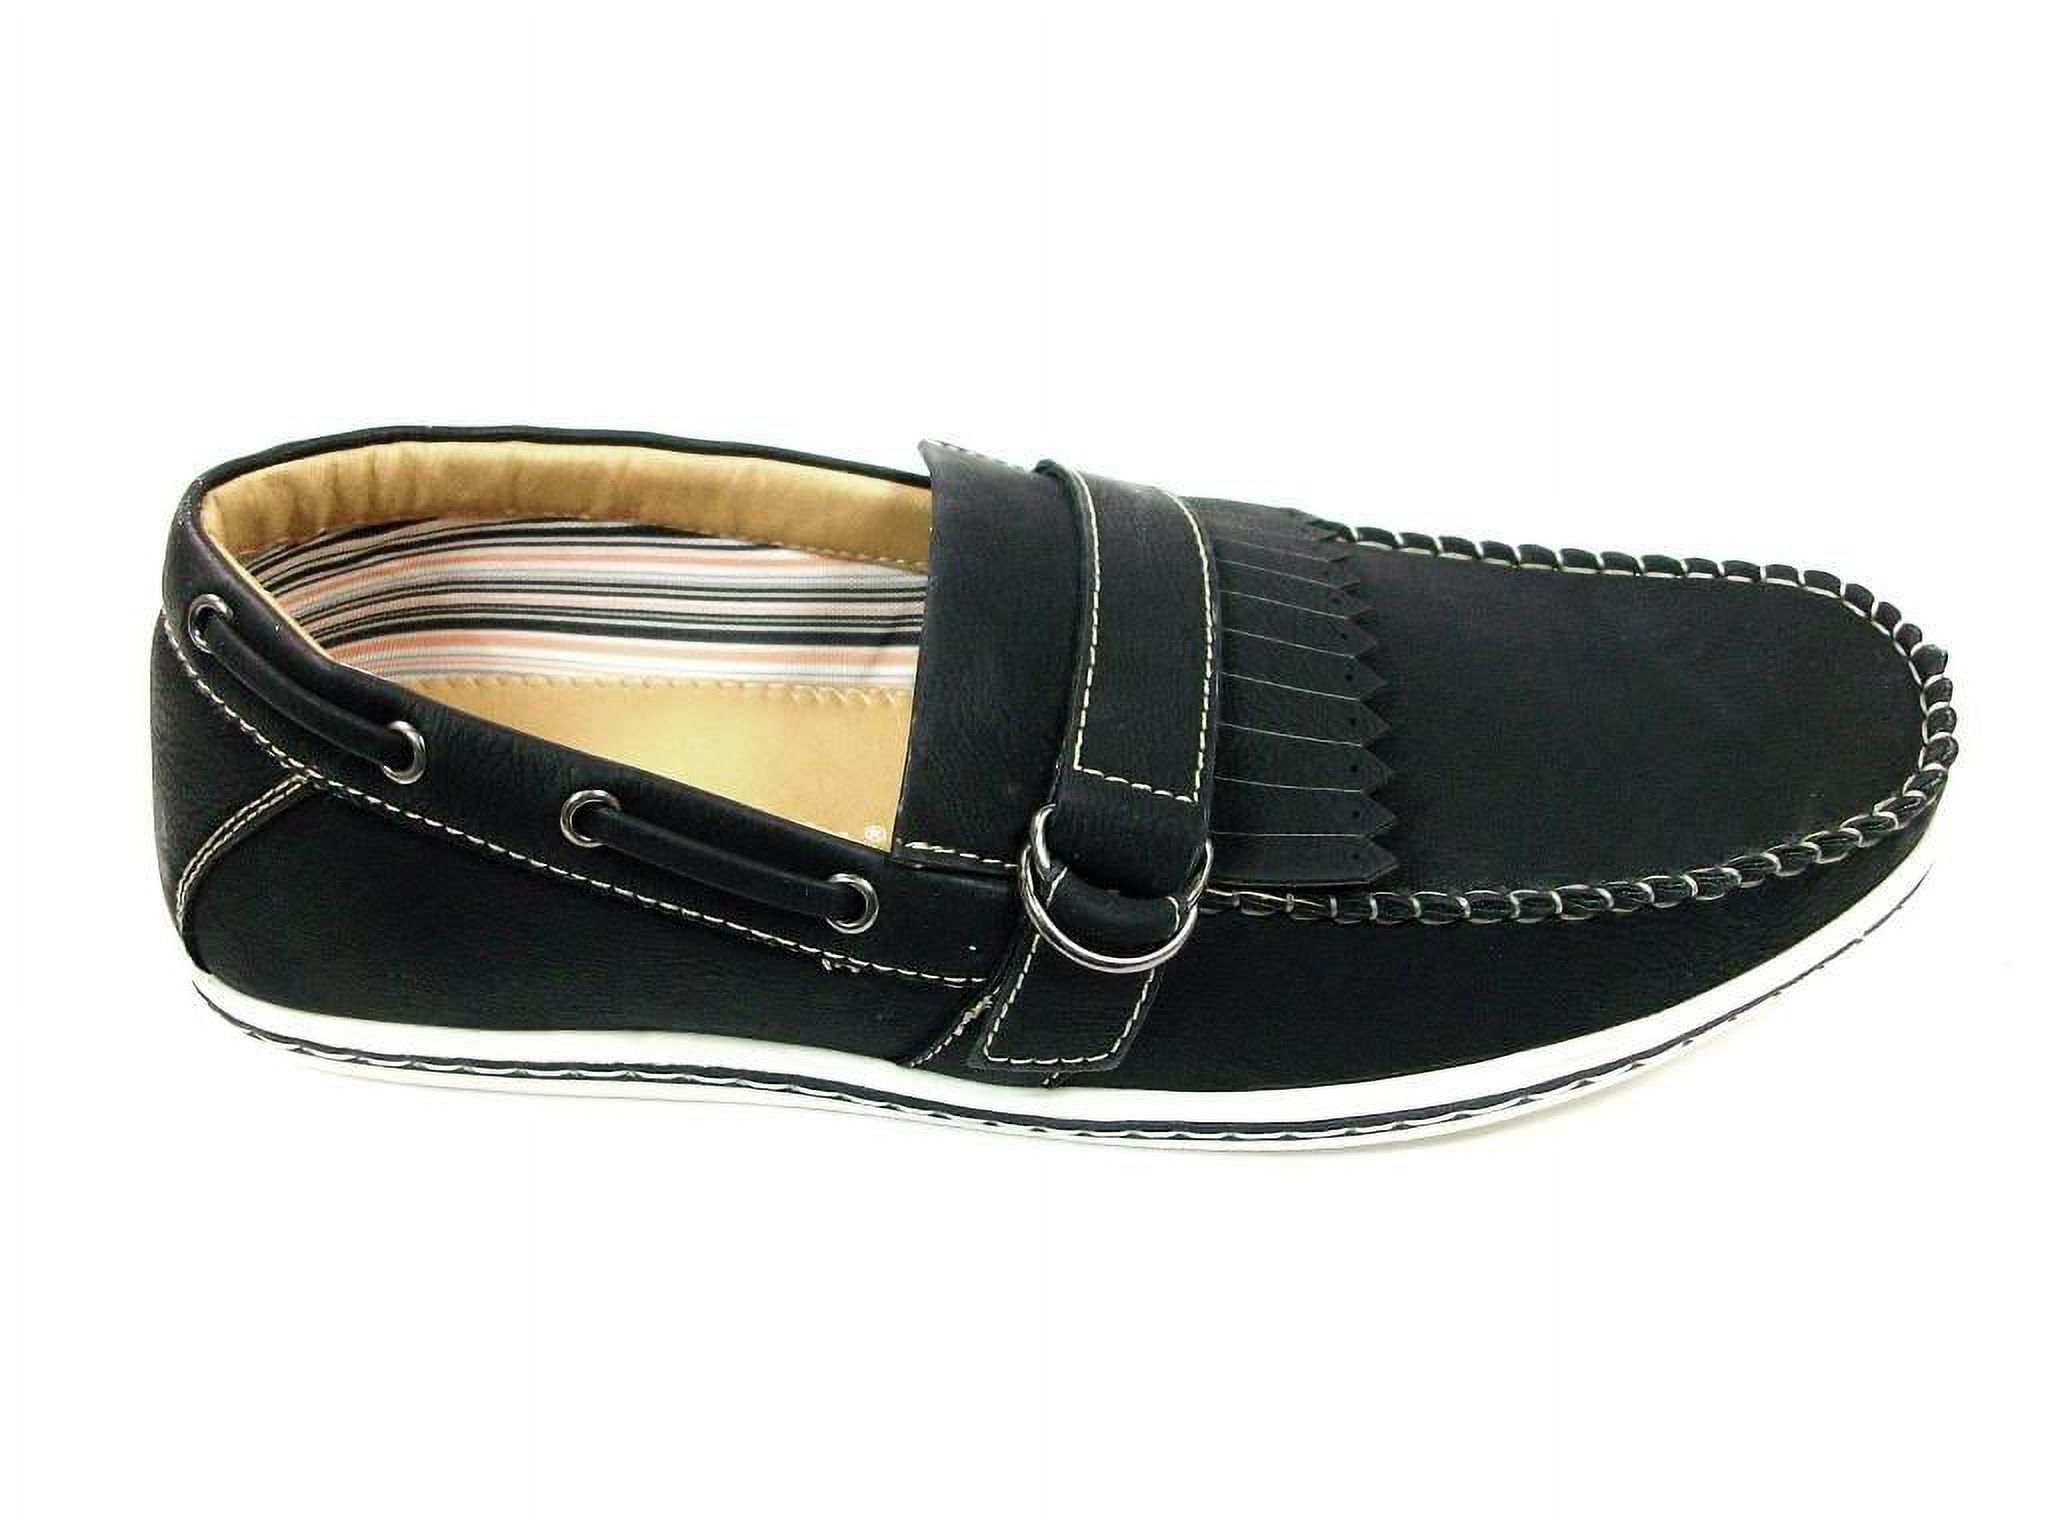 Polar Fox Mens Black Slip on Casual Driving Boat Shoes Buckle Design Styled In Italy - image 2 of 6